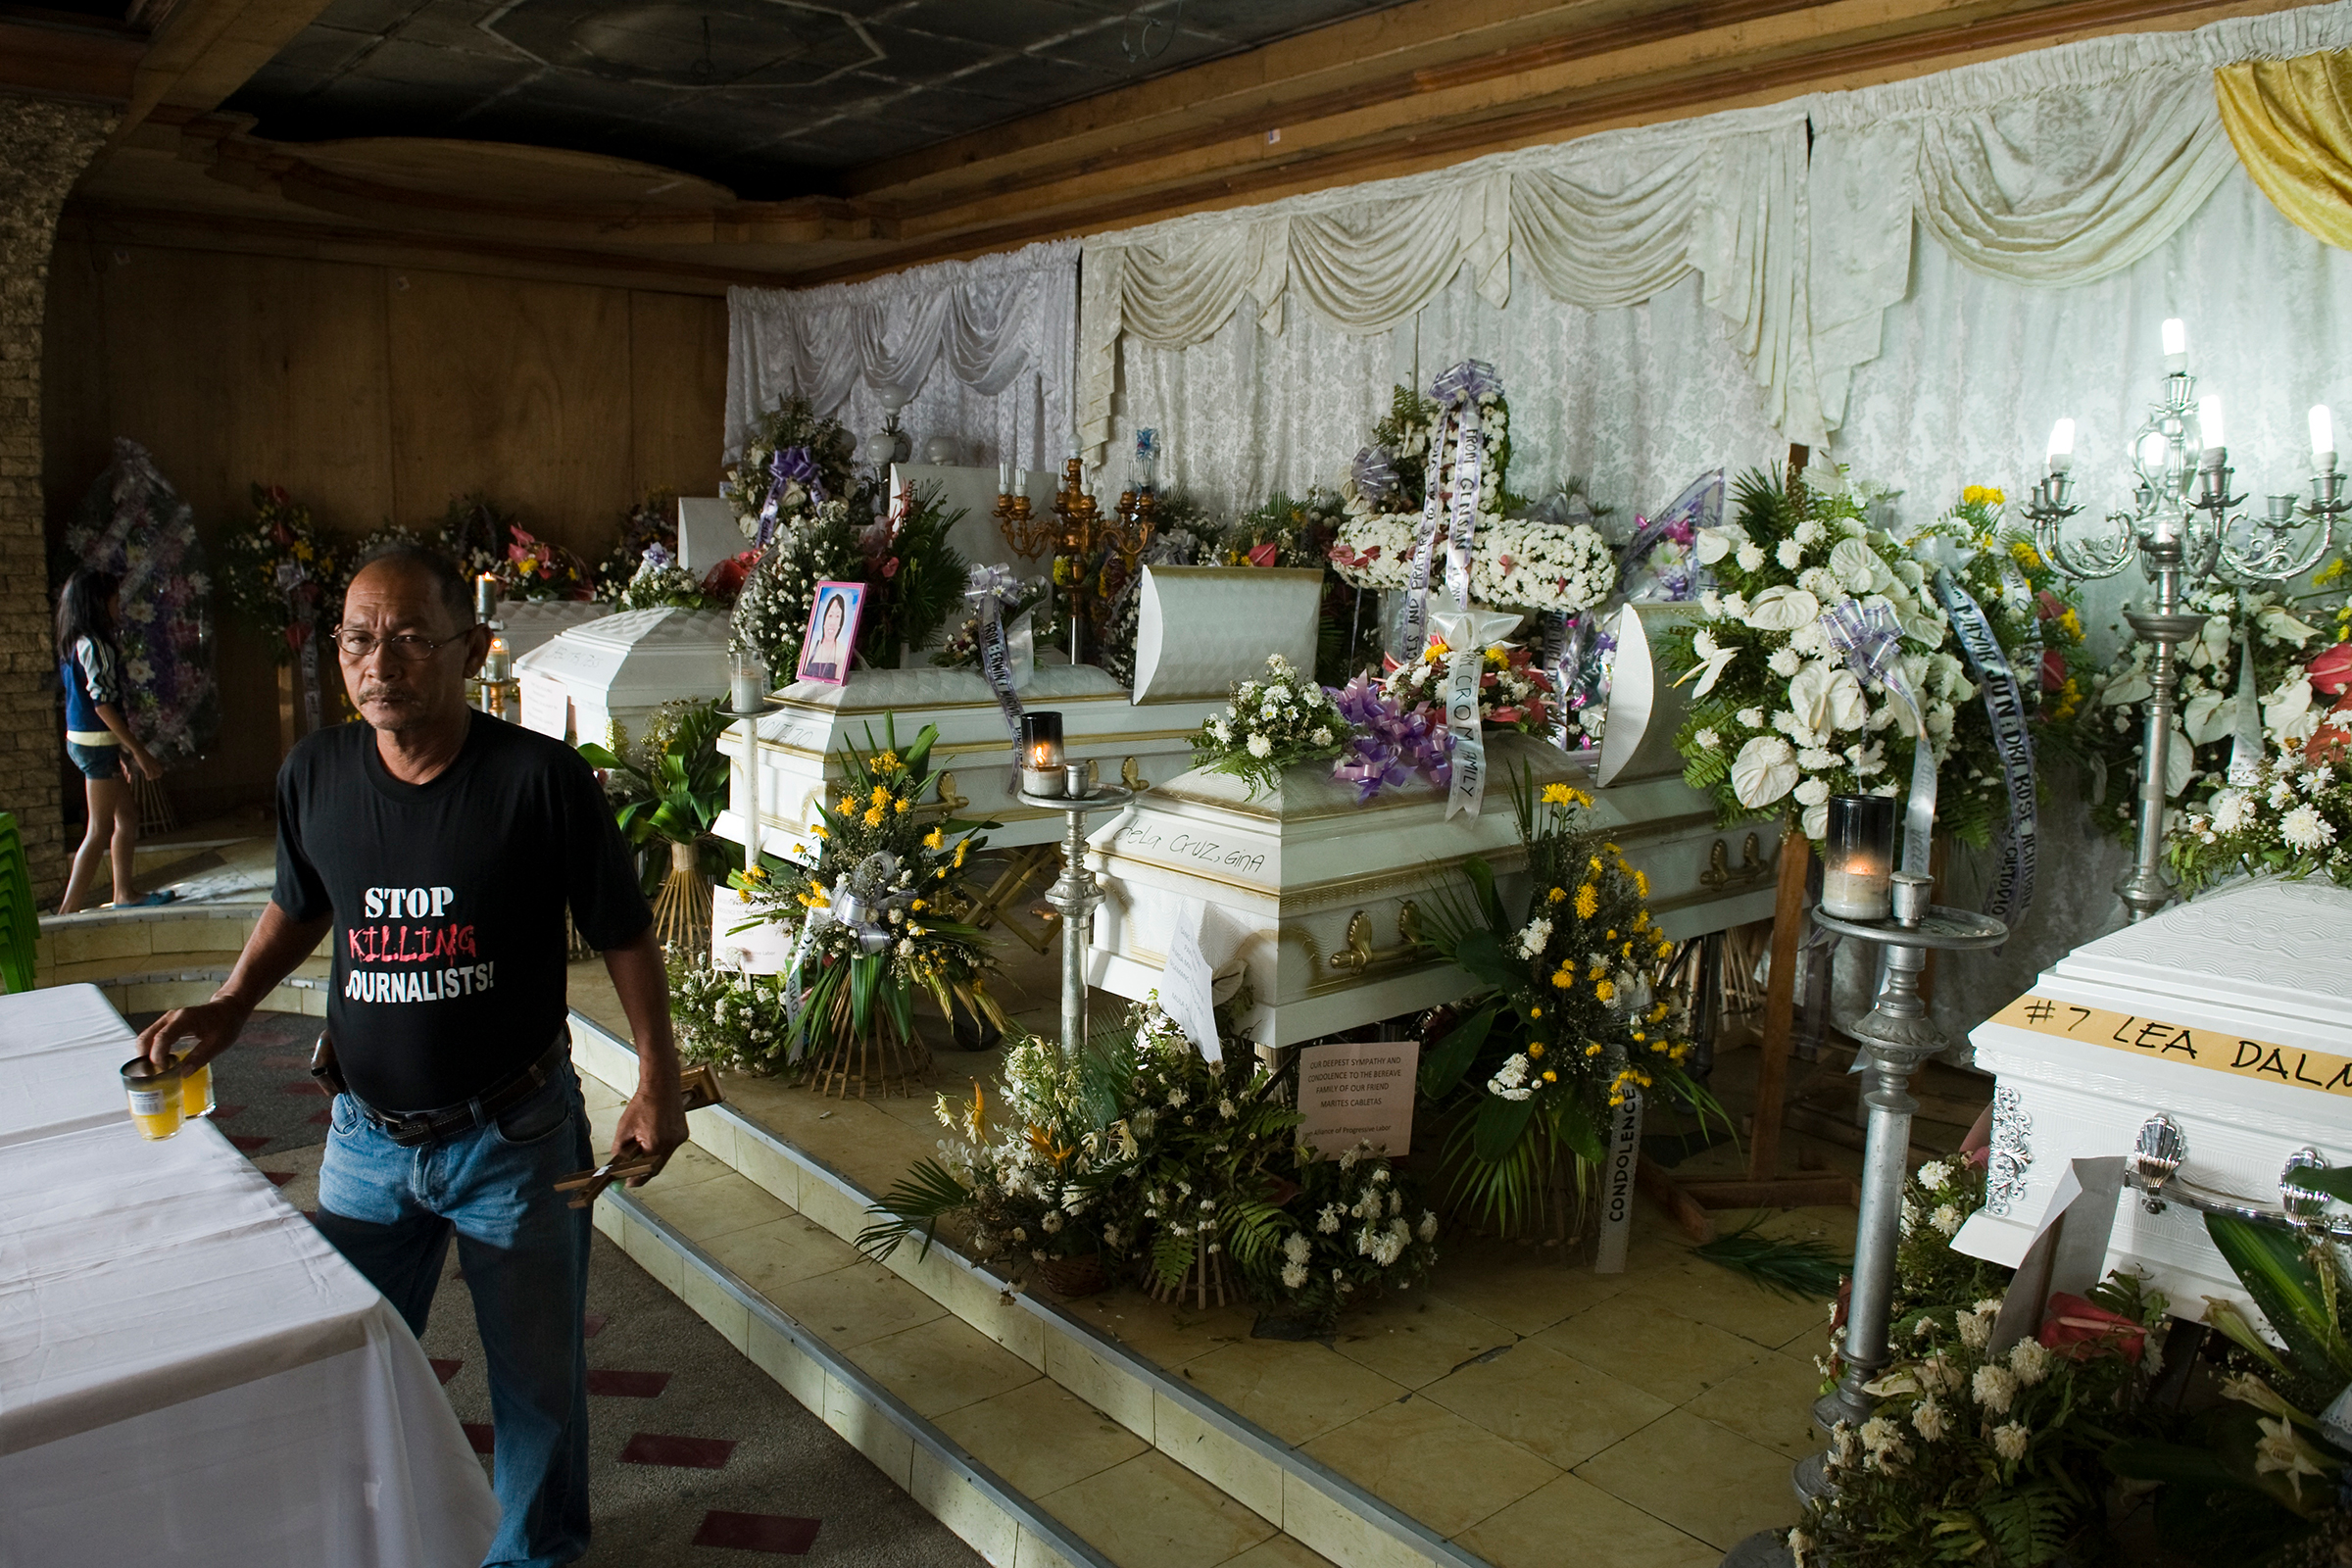 A wake for murdered journalists at the Collado Funeral Home in General Santos City, Mindanao, in 2009. (Gerhard Joren—LightRocket/Getty Images)